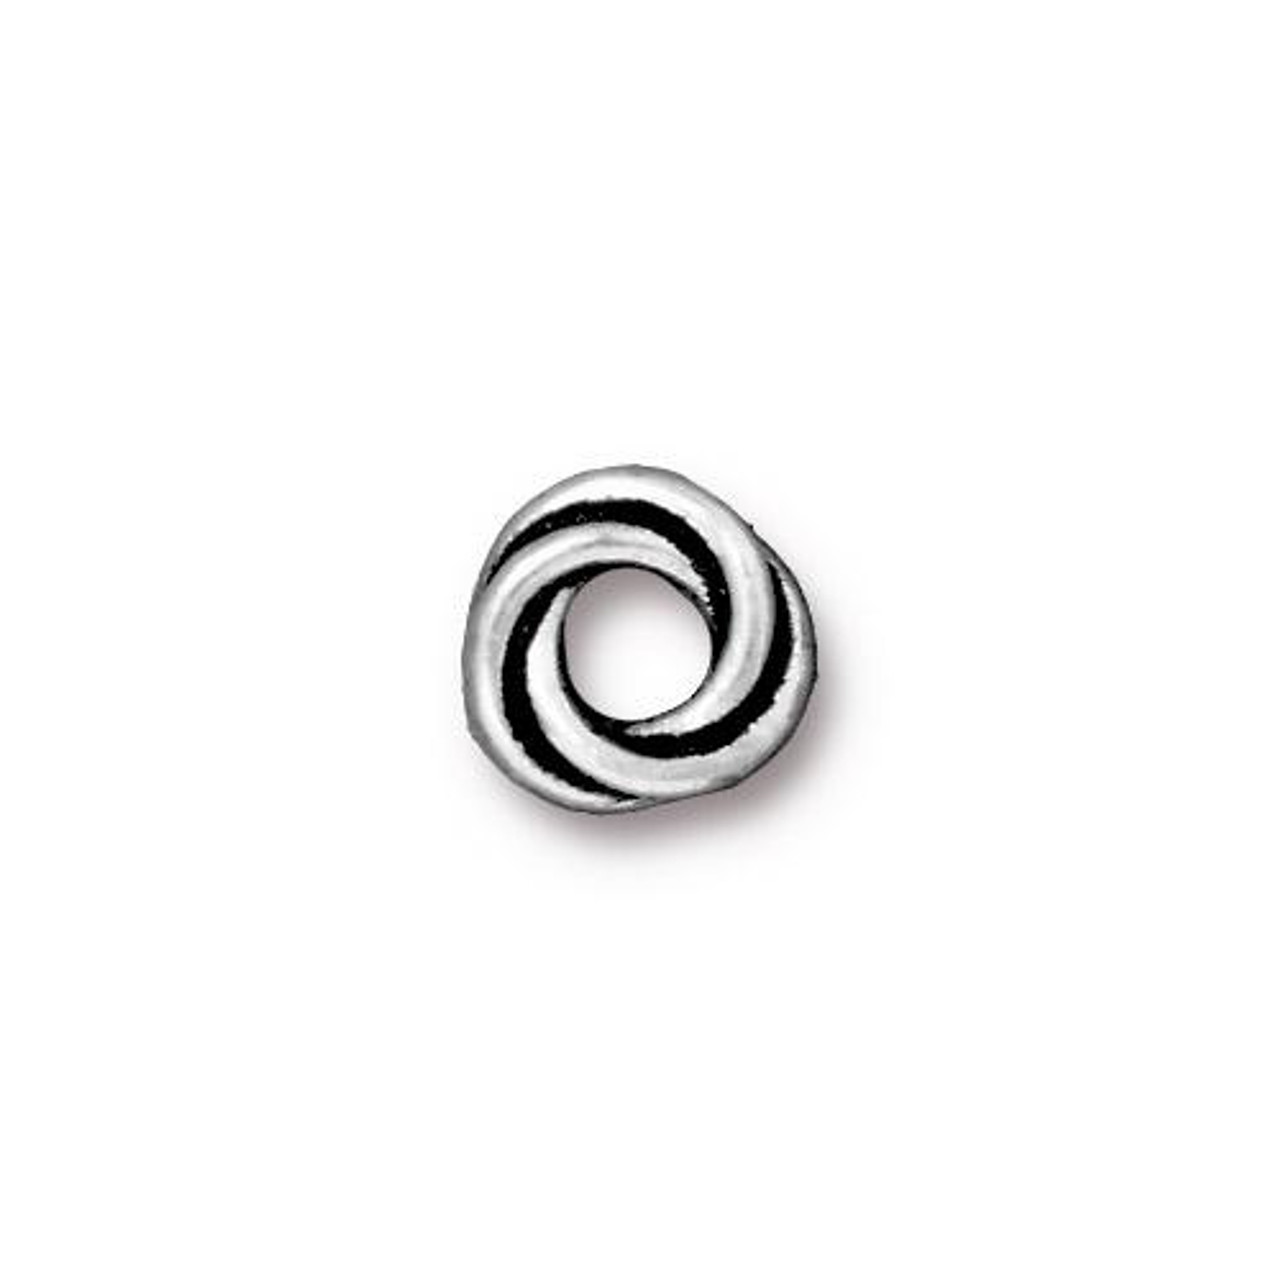 Twisted 8mm Spacer Bead, Antiqued Silver Plate, 20 per Pack ...